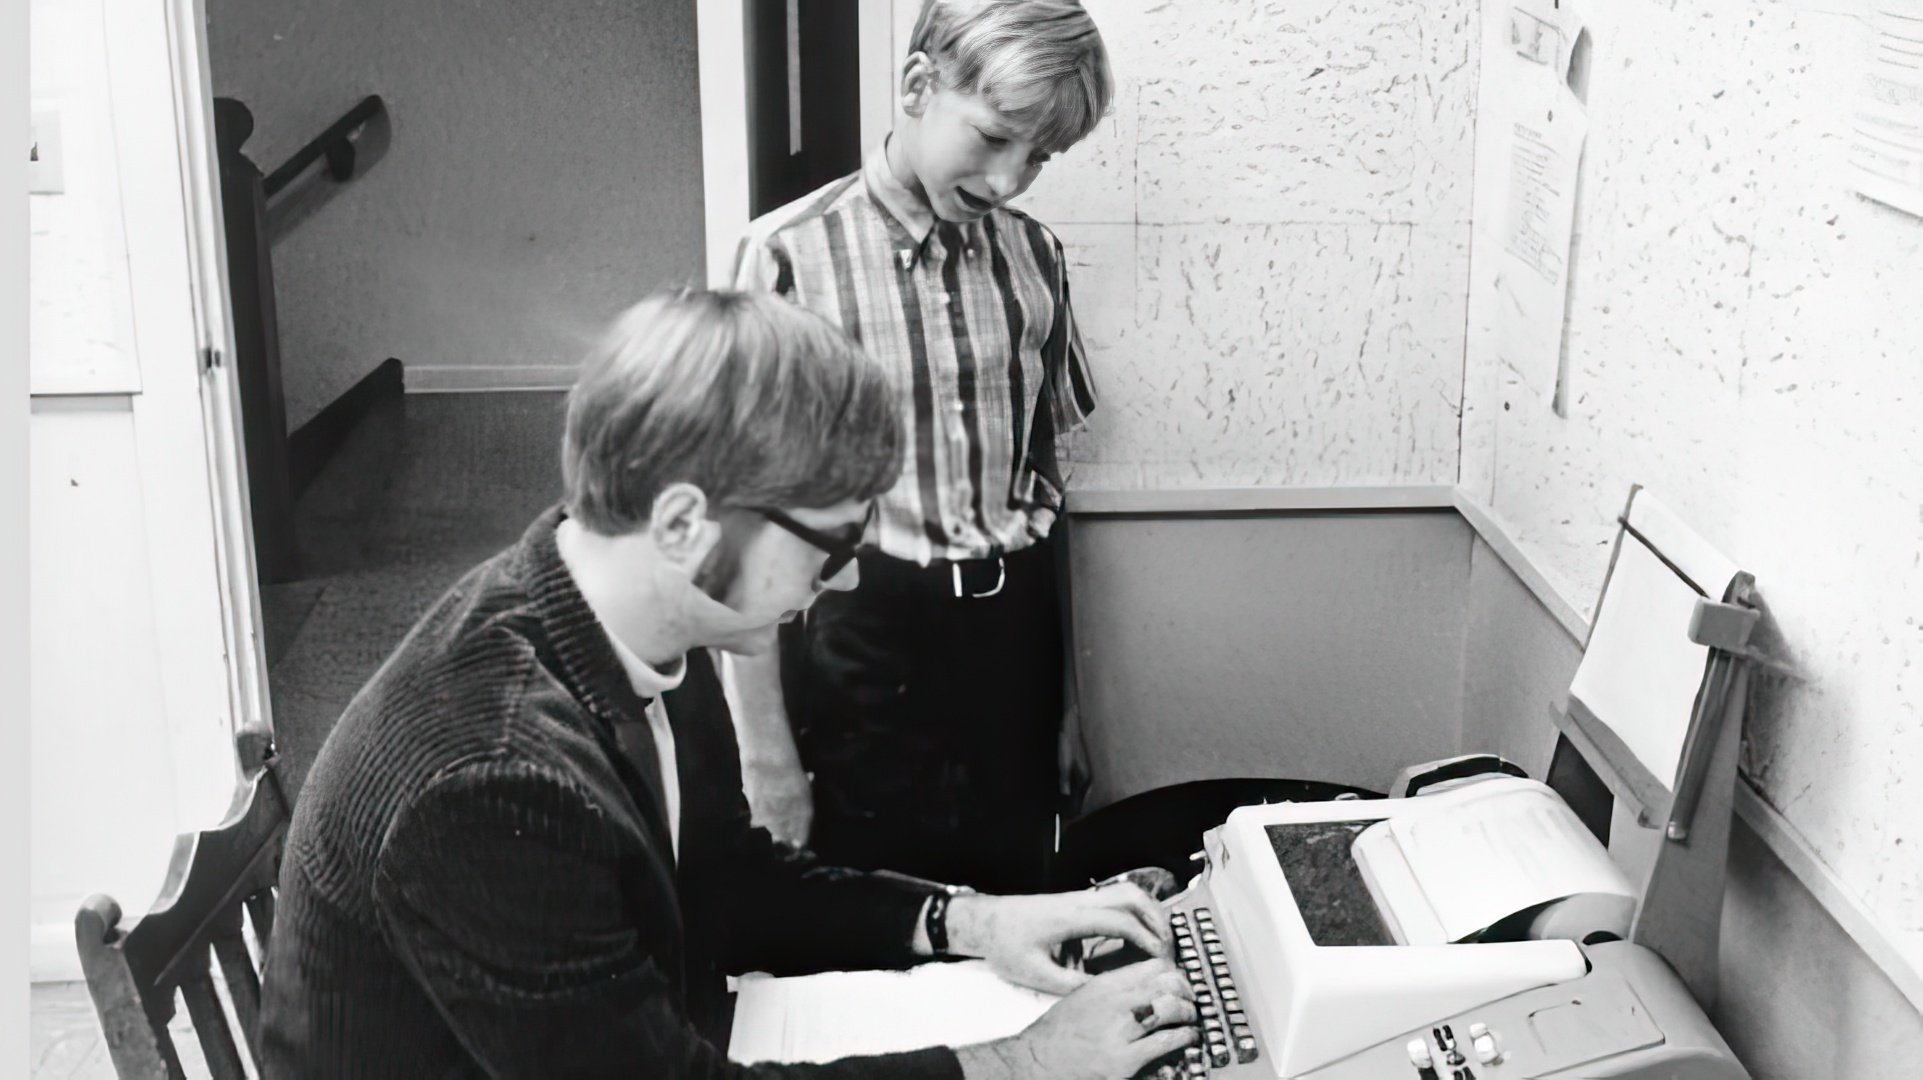 Bill Gates and Paul Allen attended the same school